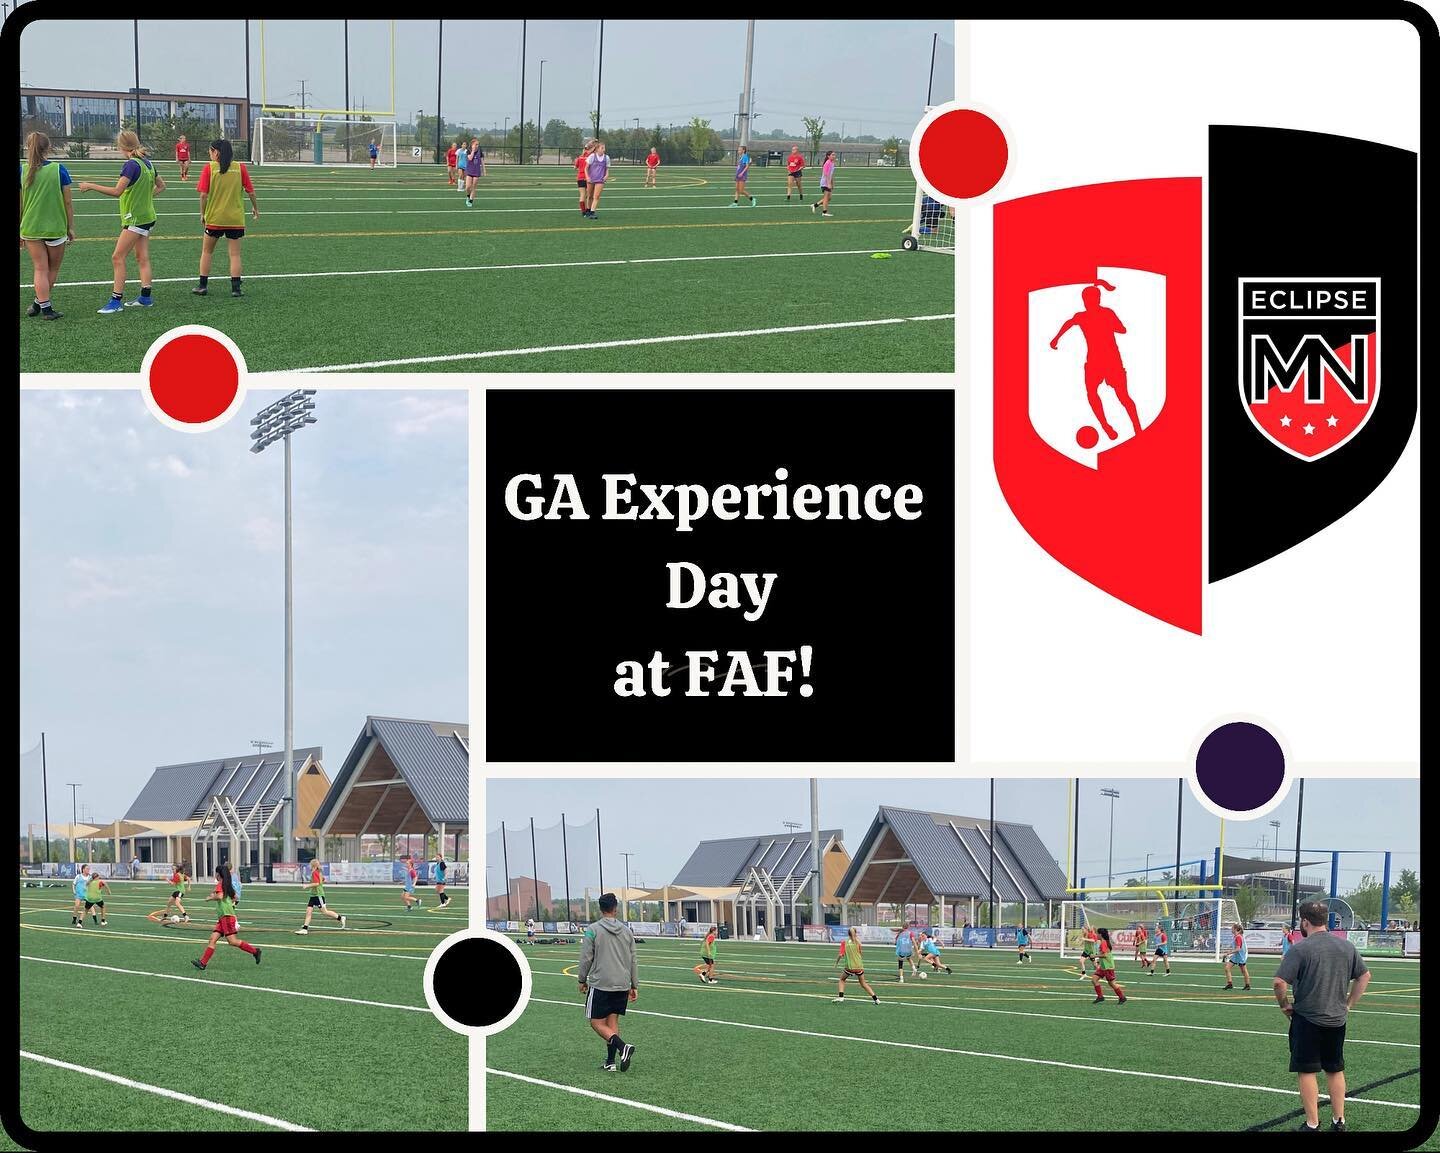 Great to see everyone for the GA Experience Day at FAF. ⚽️💥💥 Tryouts for the GA 2006, 2007, 2008 &amp; 2009 teams start Sunday. Register now @ mneclipse.com or link in bio 👆 #mneclipsesoccer #maplegrove #girlsacademy